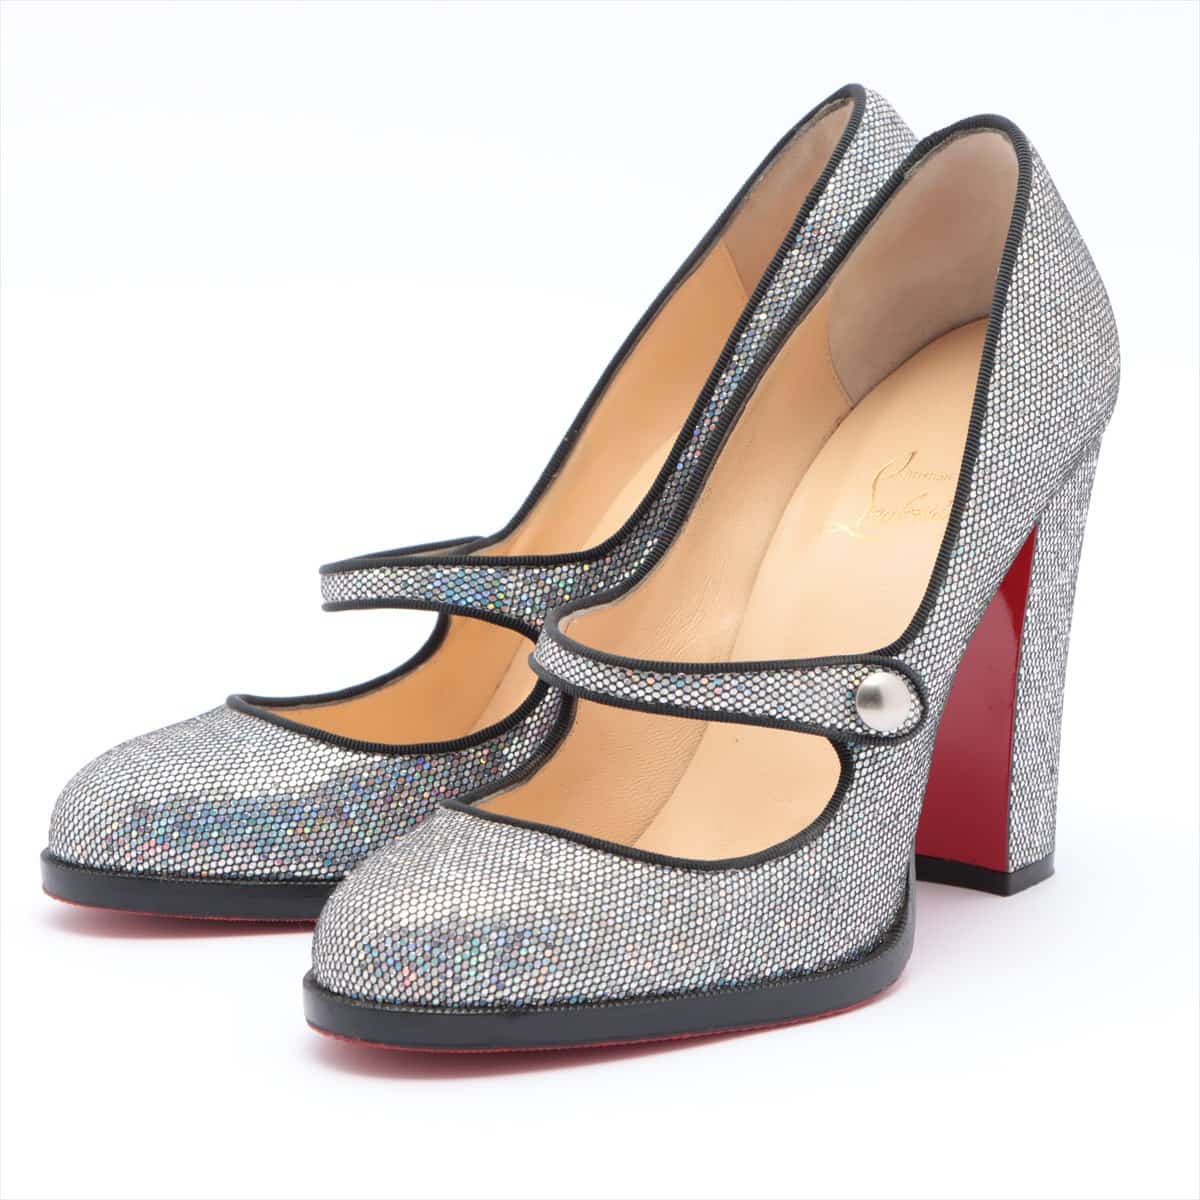 Christian Louboutin Glitter Strap Pumps 38.5 Ladies' Silver Resoled